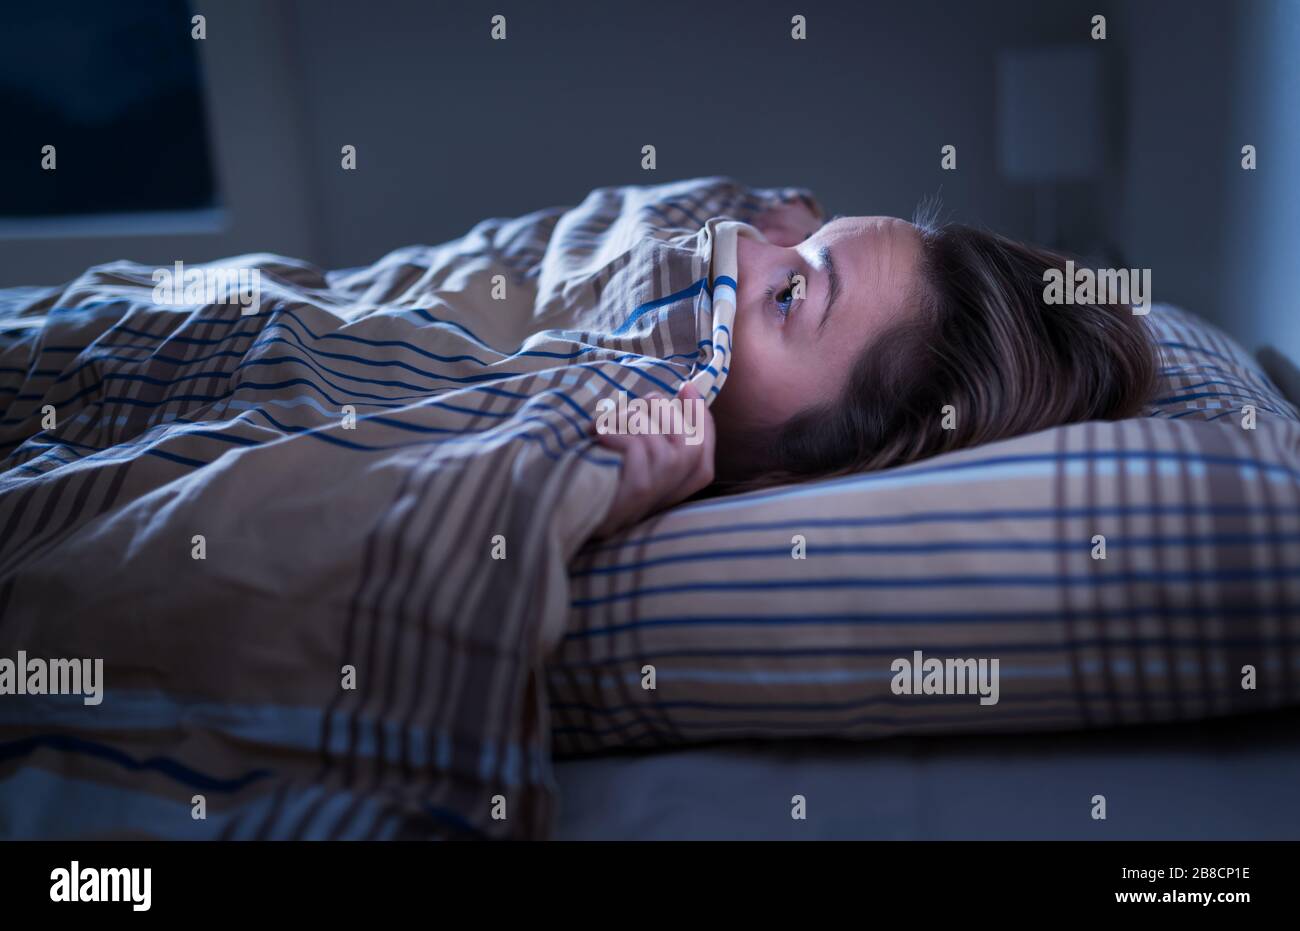 Scared woman hiding under blanket. Afraid of the dark. Unable to sleep after nightmare or bad dream. Awake in the middle of the night in bedroom. Stock Photo